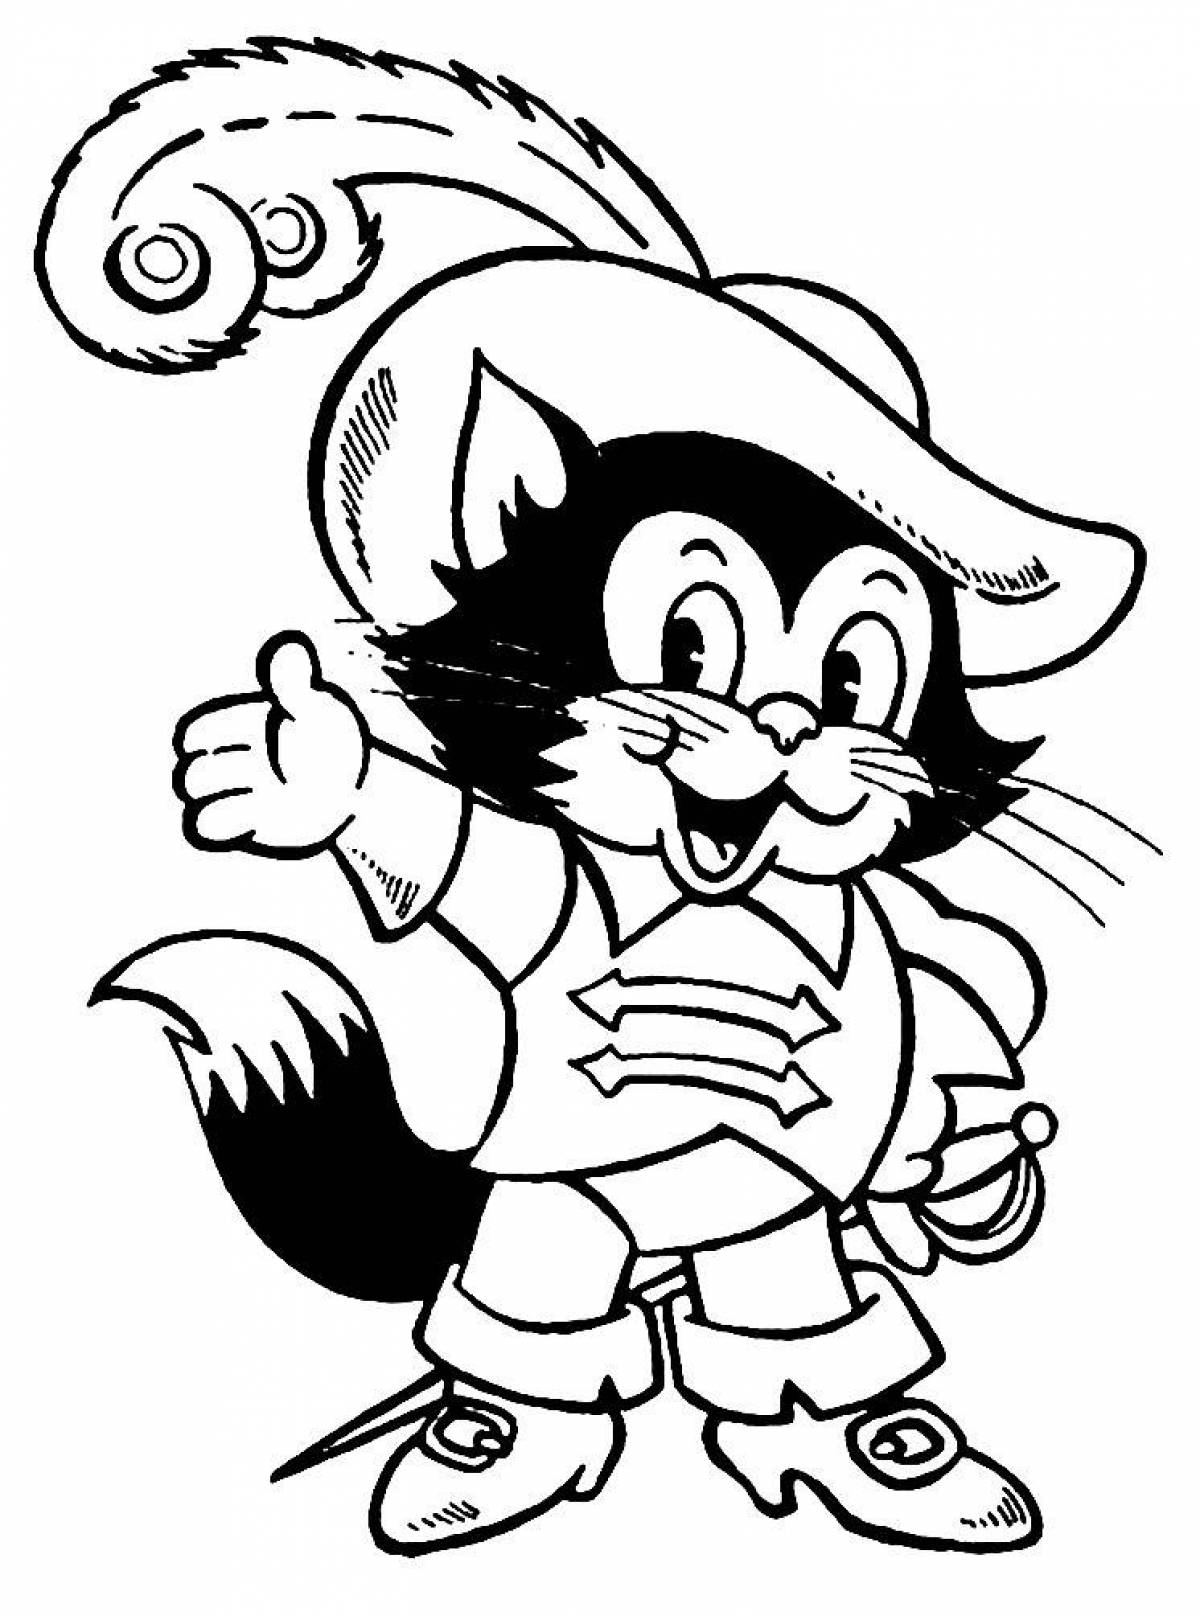 Puss in Boots coloring page for kids